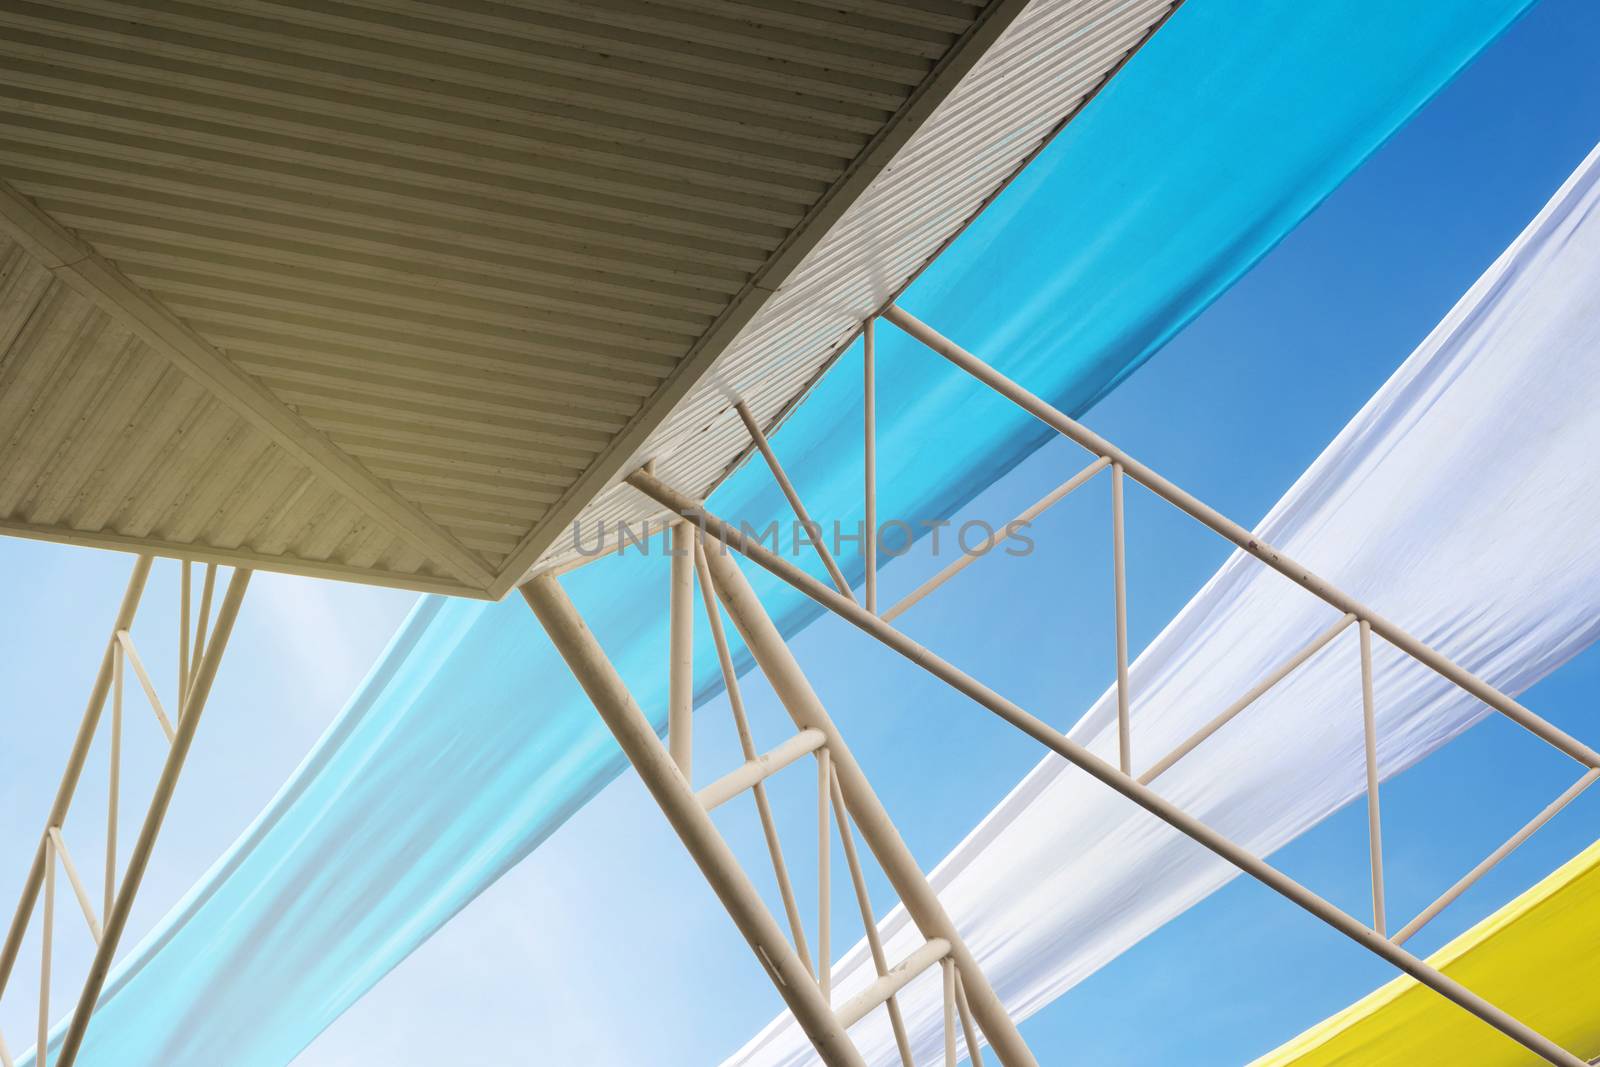 Steel Frame With Fabric Three Colors As Backdrop.